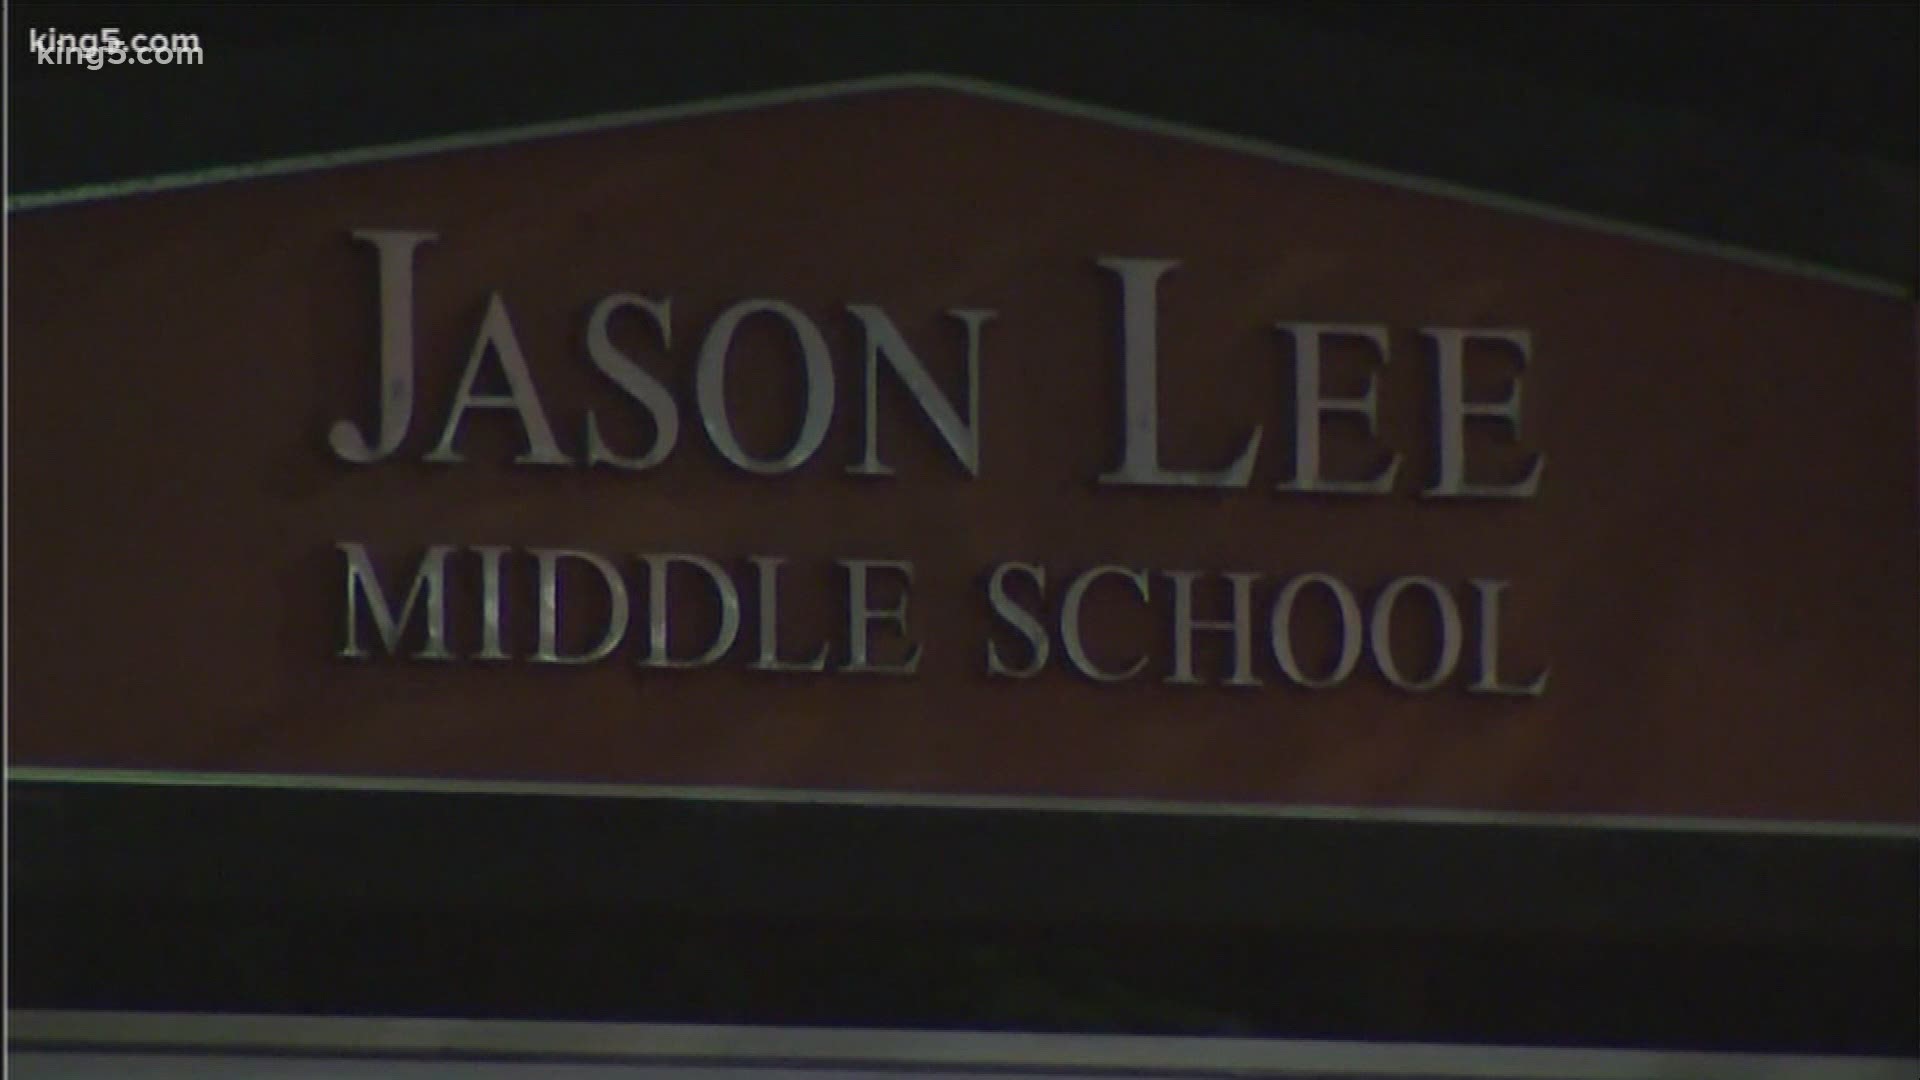 Jason Lee Middle School may soon get a new name.  An overwhelming majority of respondents to a survey of neighbors and alumni were in favor of a name change.